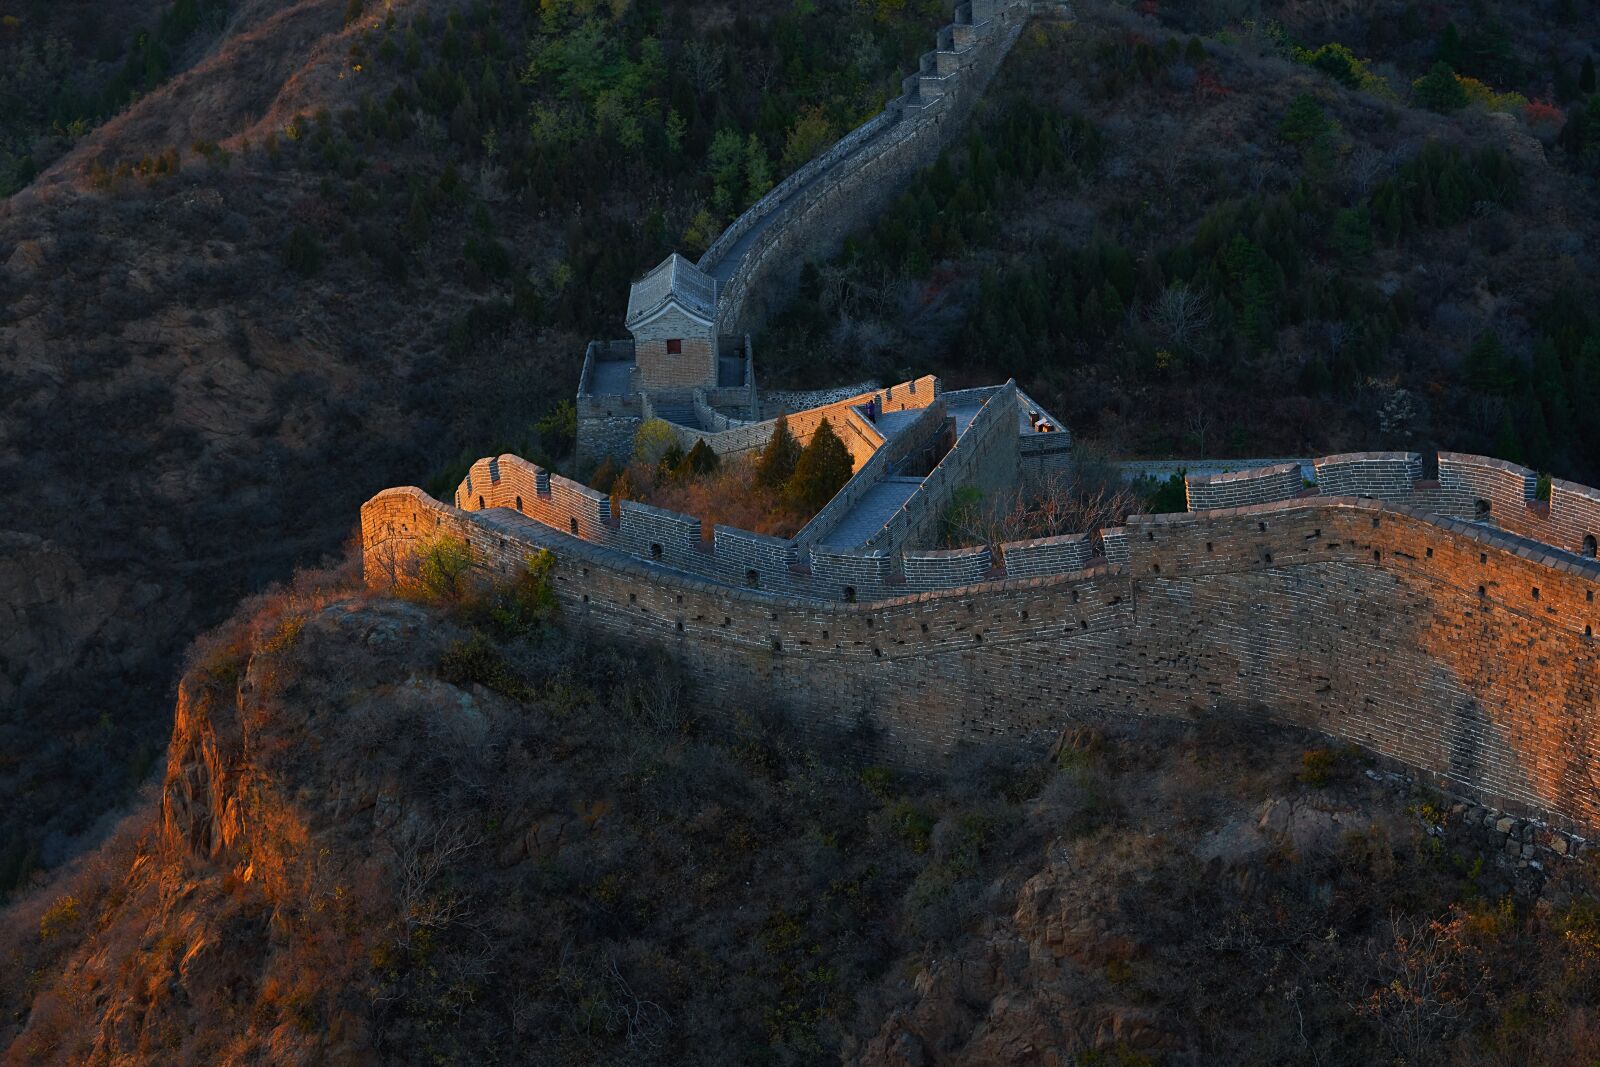 Sony a7R III sample photo. The great wall, the photography